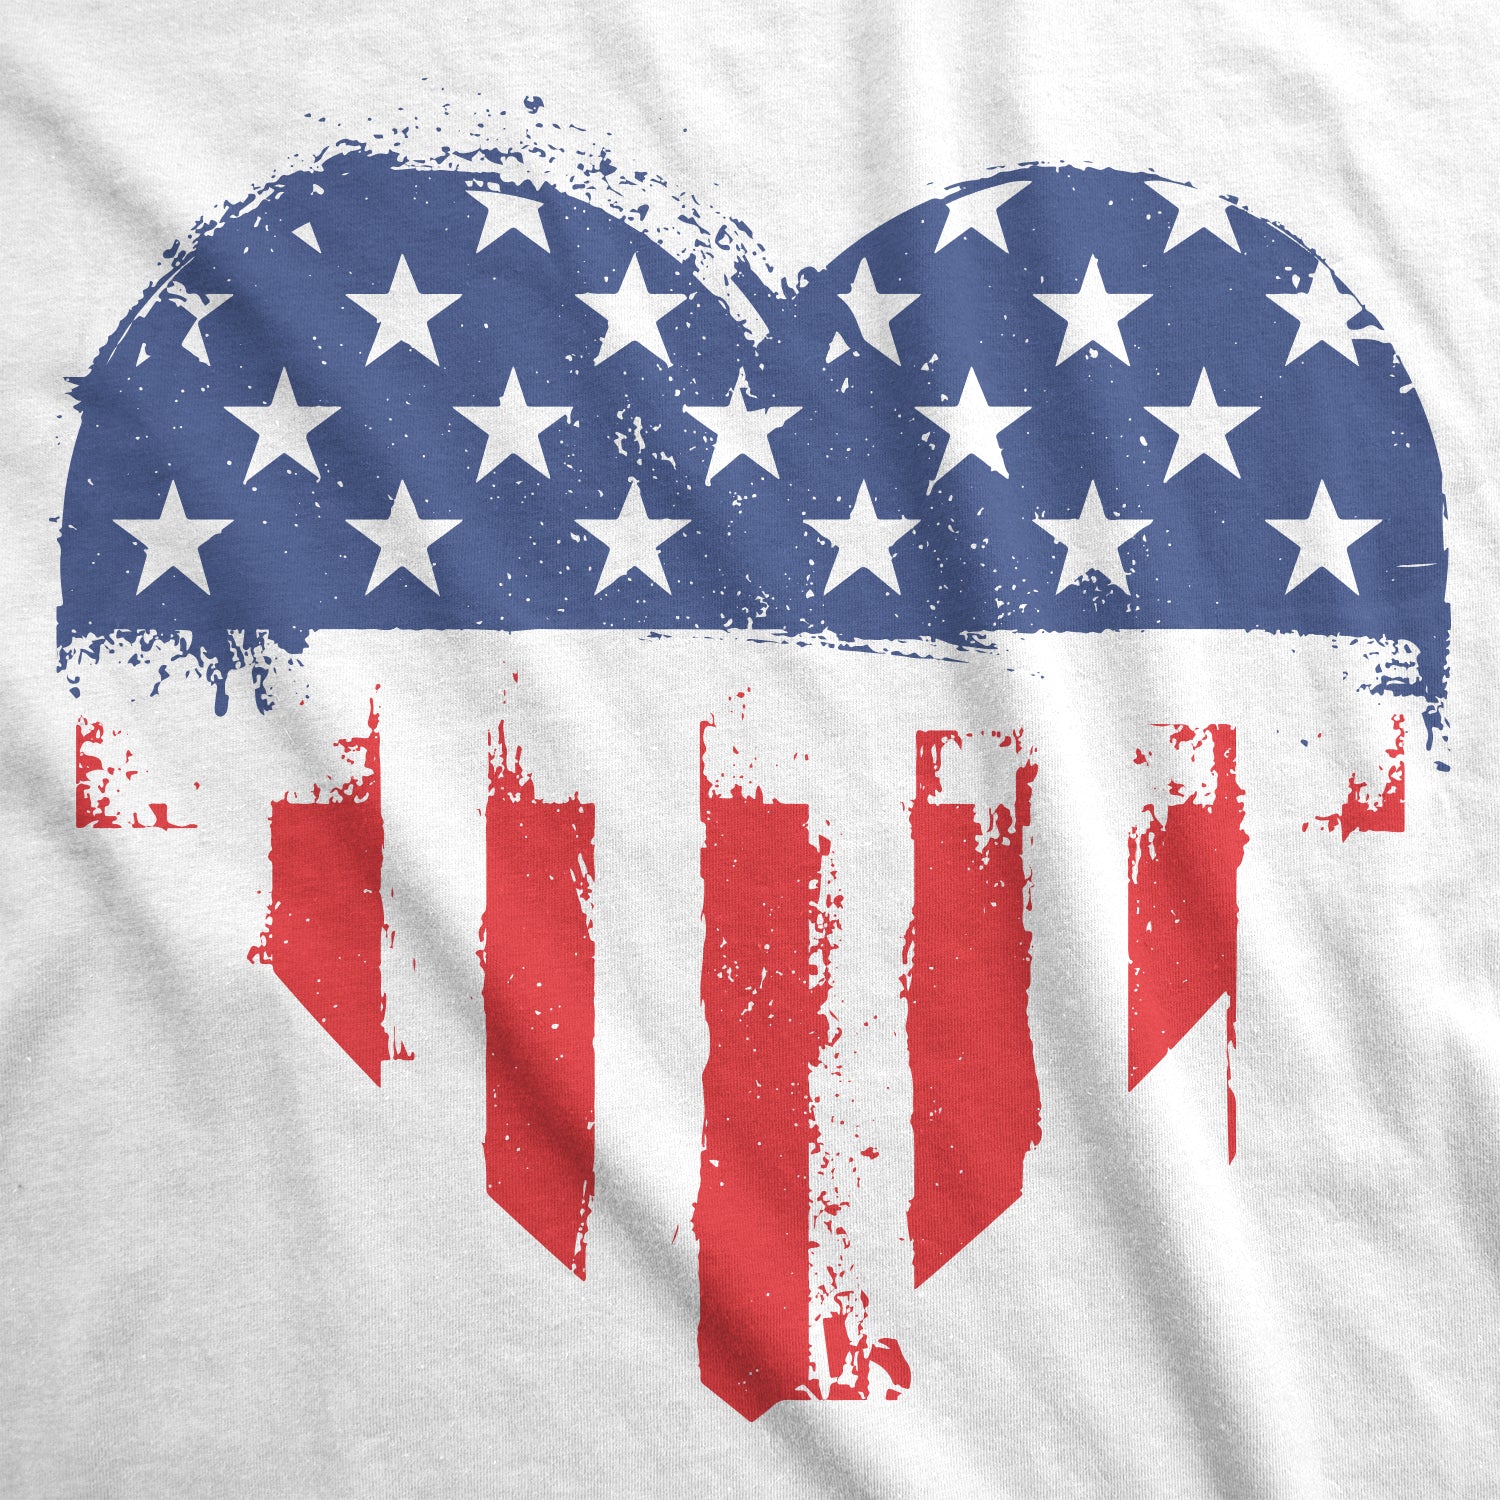 Funny White USA Heart Belly Maternity T Shirt Nerdy Fourth of July Tee